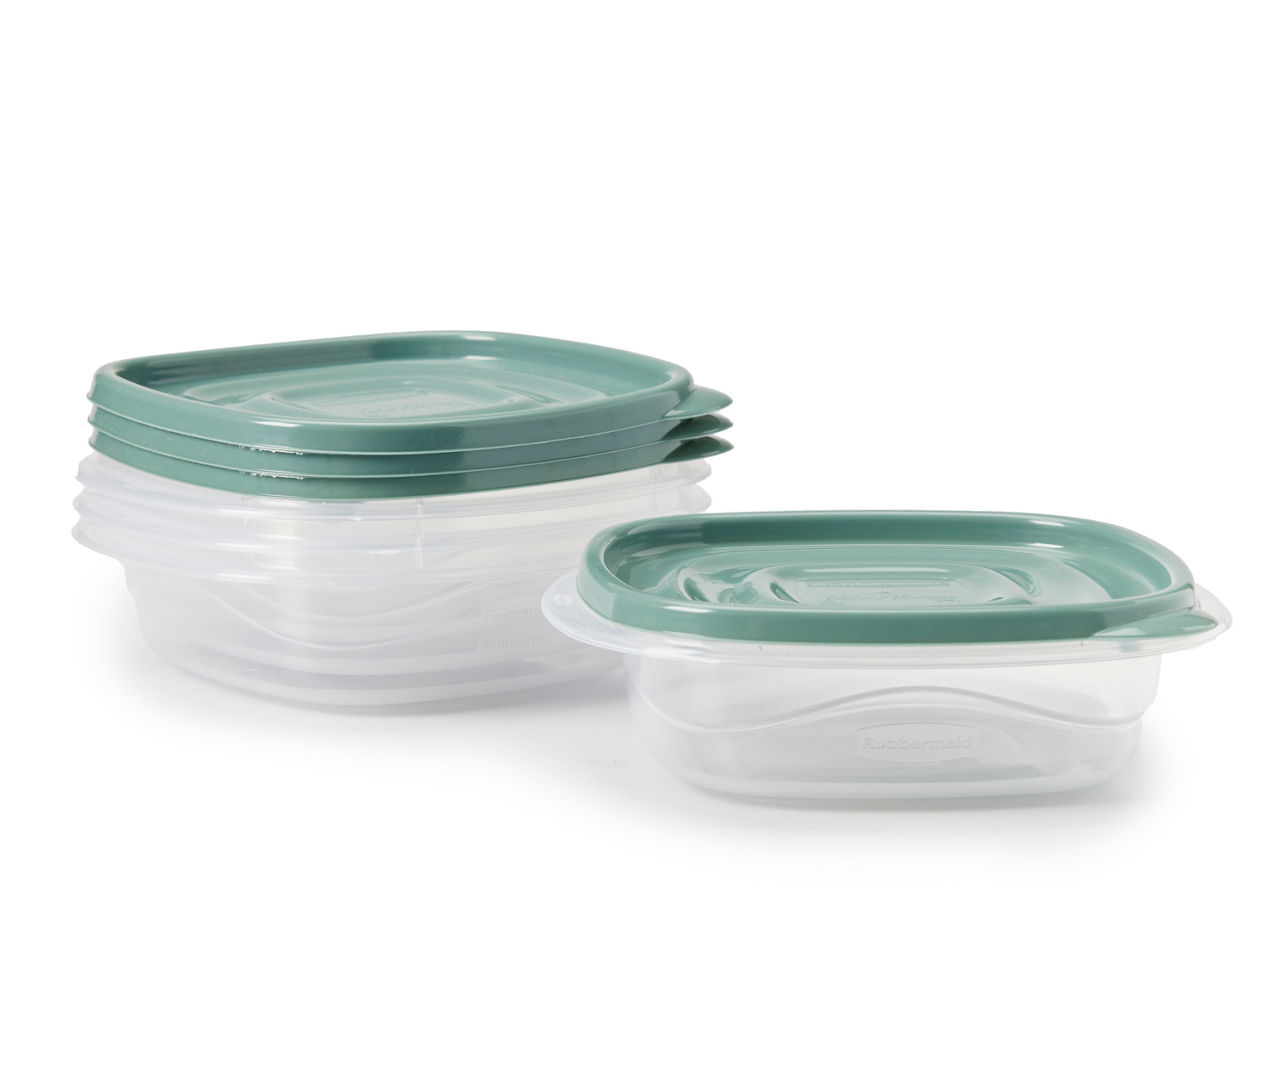 Rubbermaid TakeAlongs Blue Spruce 2.9 Cup Square 4-Container Storage Set